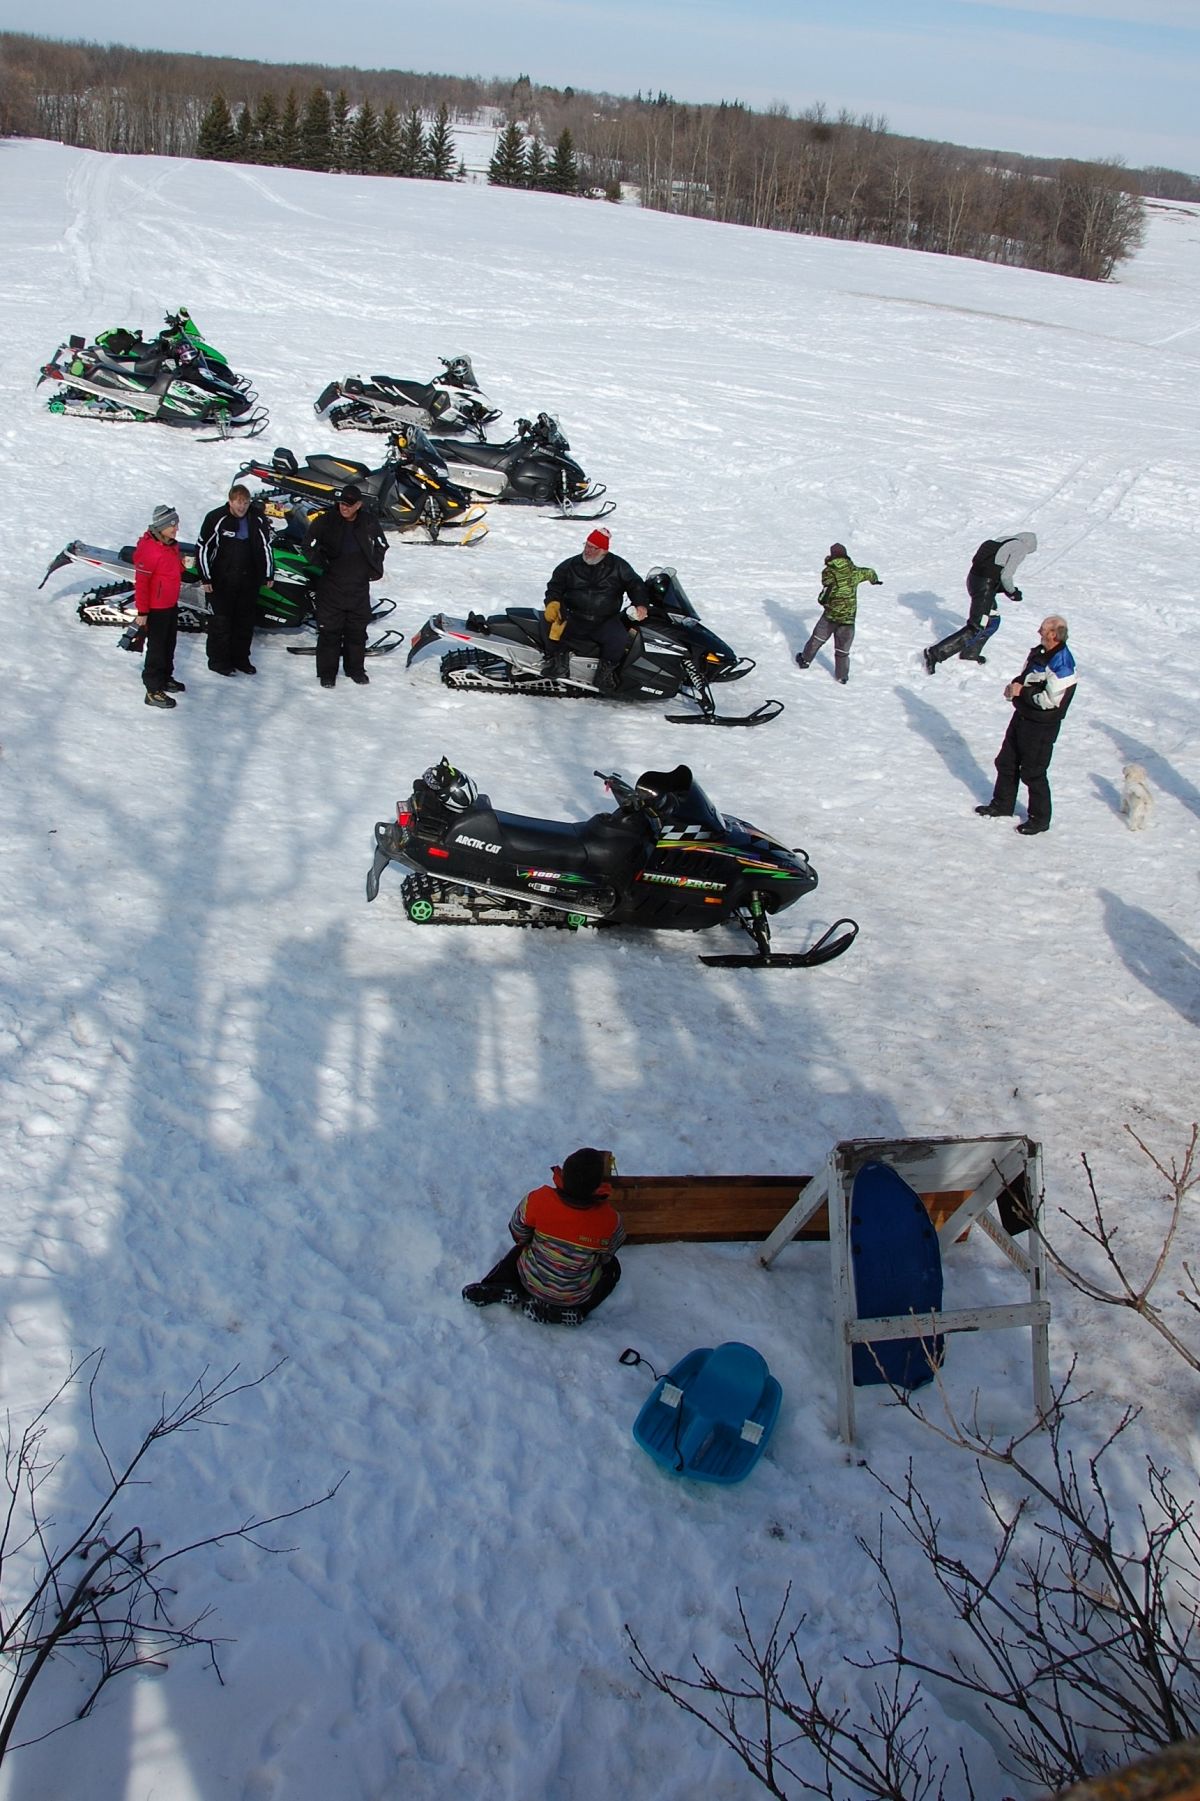 Family fun day, wiener roast on Feb 19th. Put on by Deloraine Snowmobile group @ Moe's cabin on Southwest Snowtrackers trail.